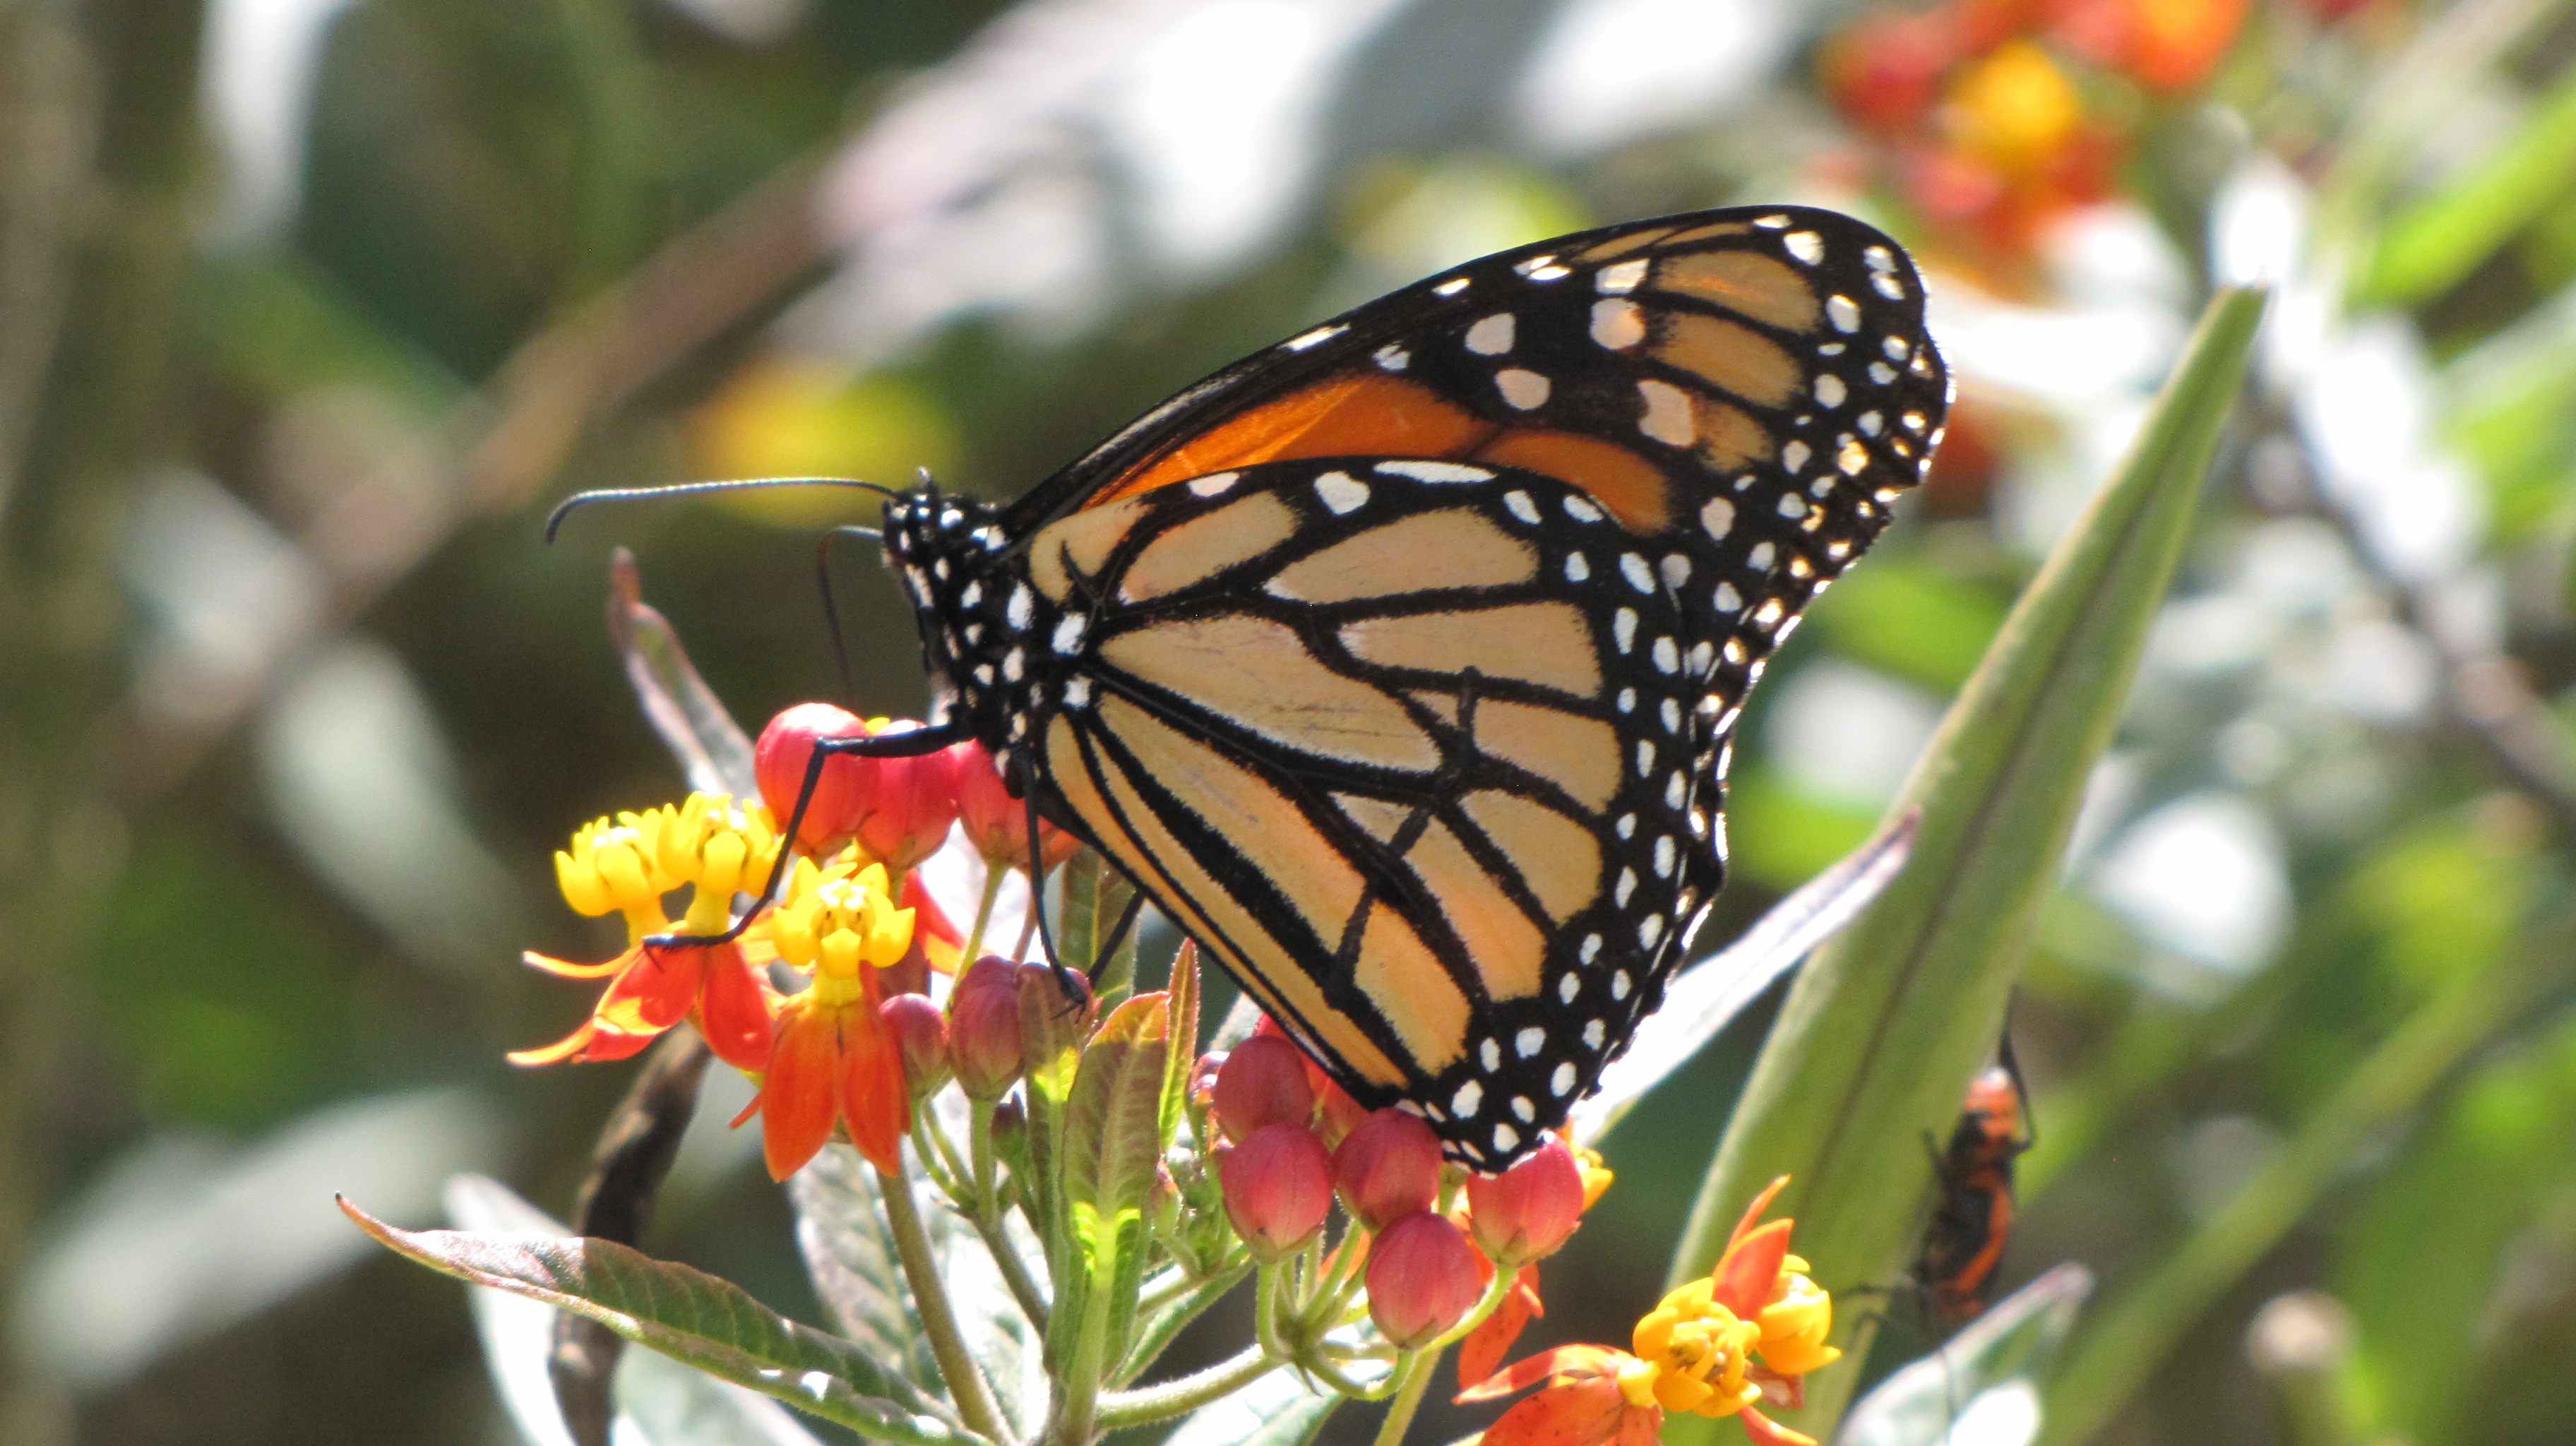 Resident Monarch butterfly at the San Antonio River Milkweed Patch